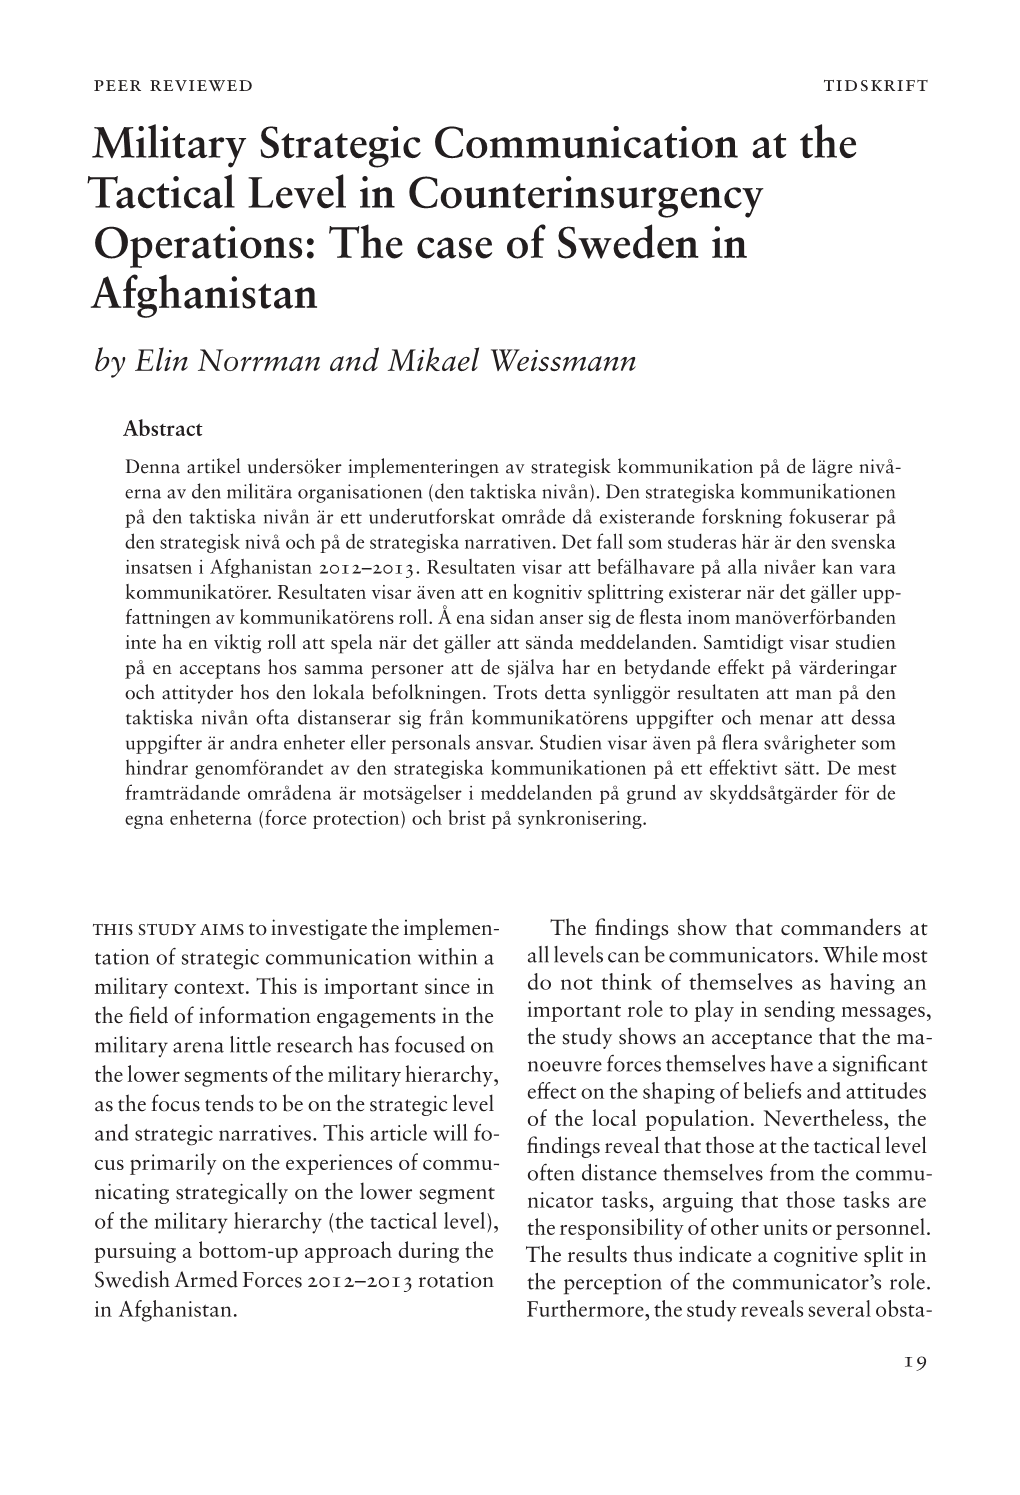 Military Strategic Communication at the Tactical Level in Counterinsurgency Operations: the Case of Sweden in Afghanistan by Elin Norrman and Mikael Weissmann